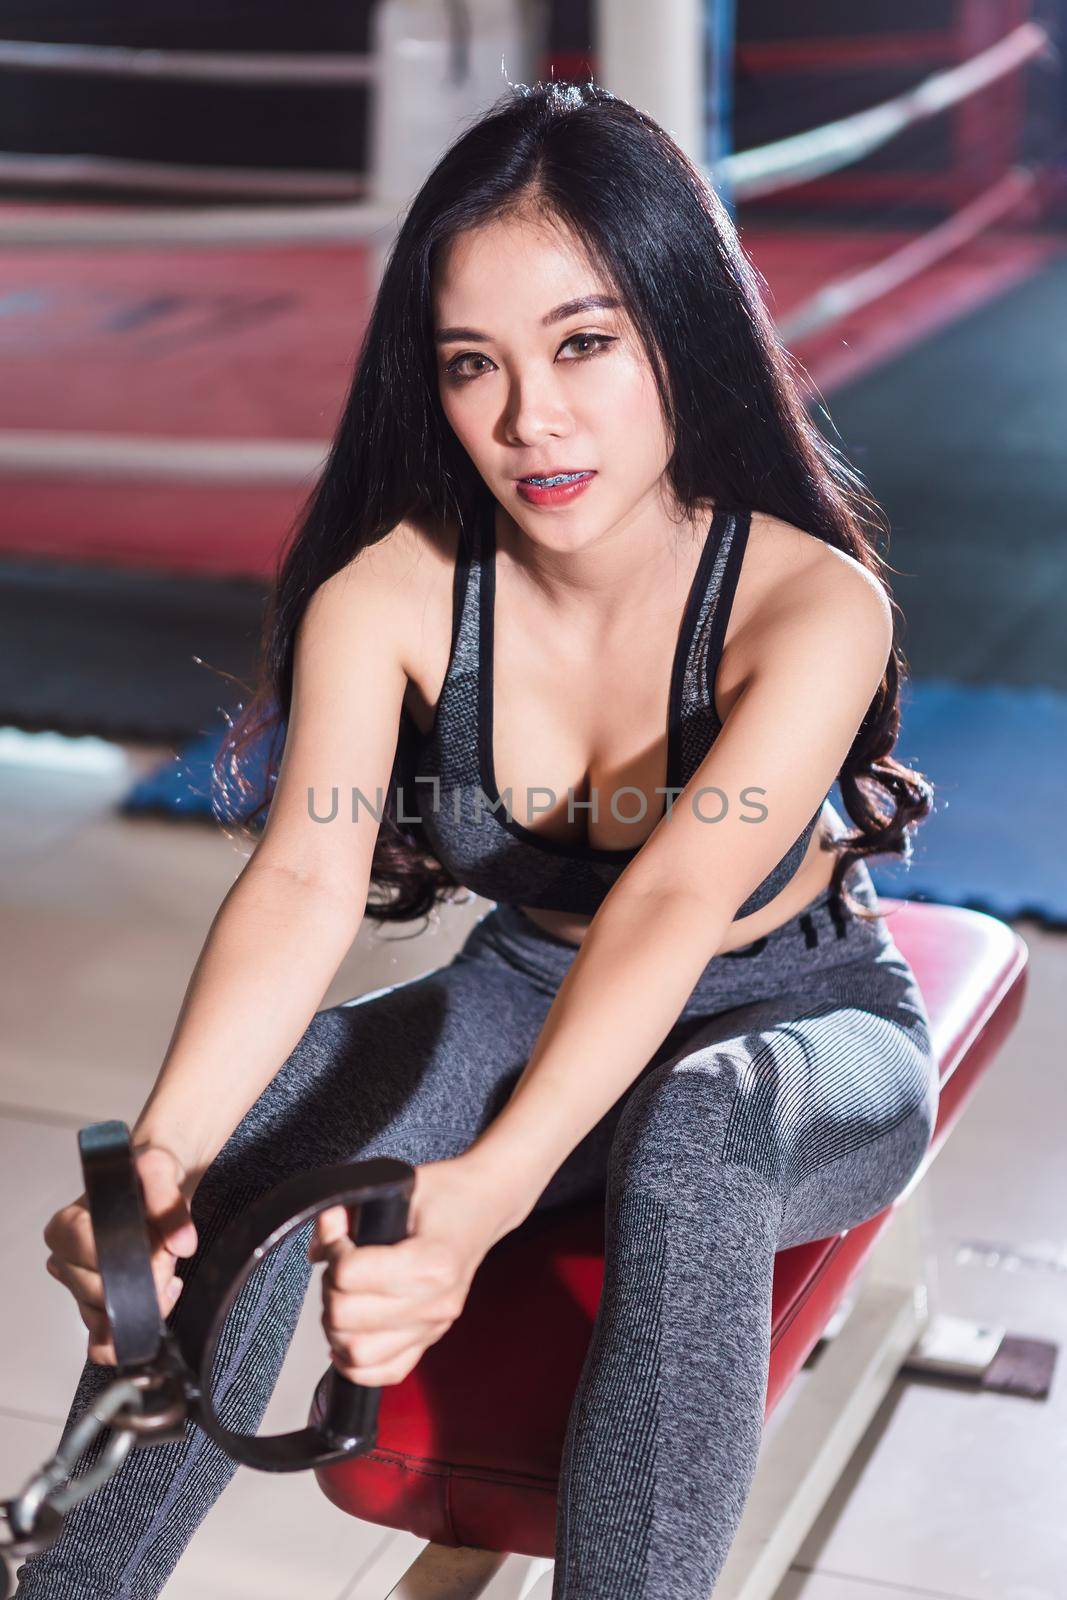 Fitness Asian women performing doing exercises training with rowing machine (Seat Cable Rows Machine) in sport gym interior and fitness health club with sports exercise equipment Gym background. by tinapob2534